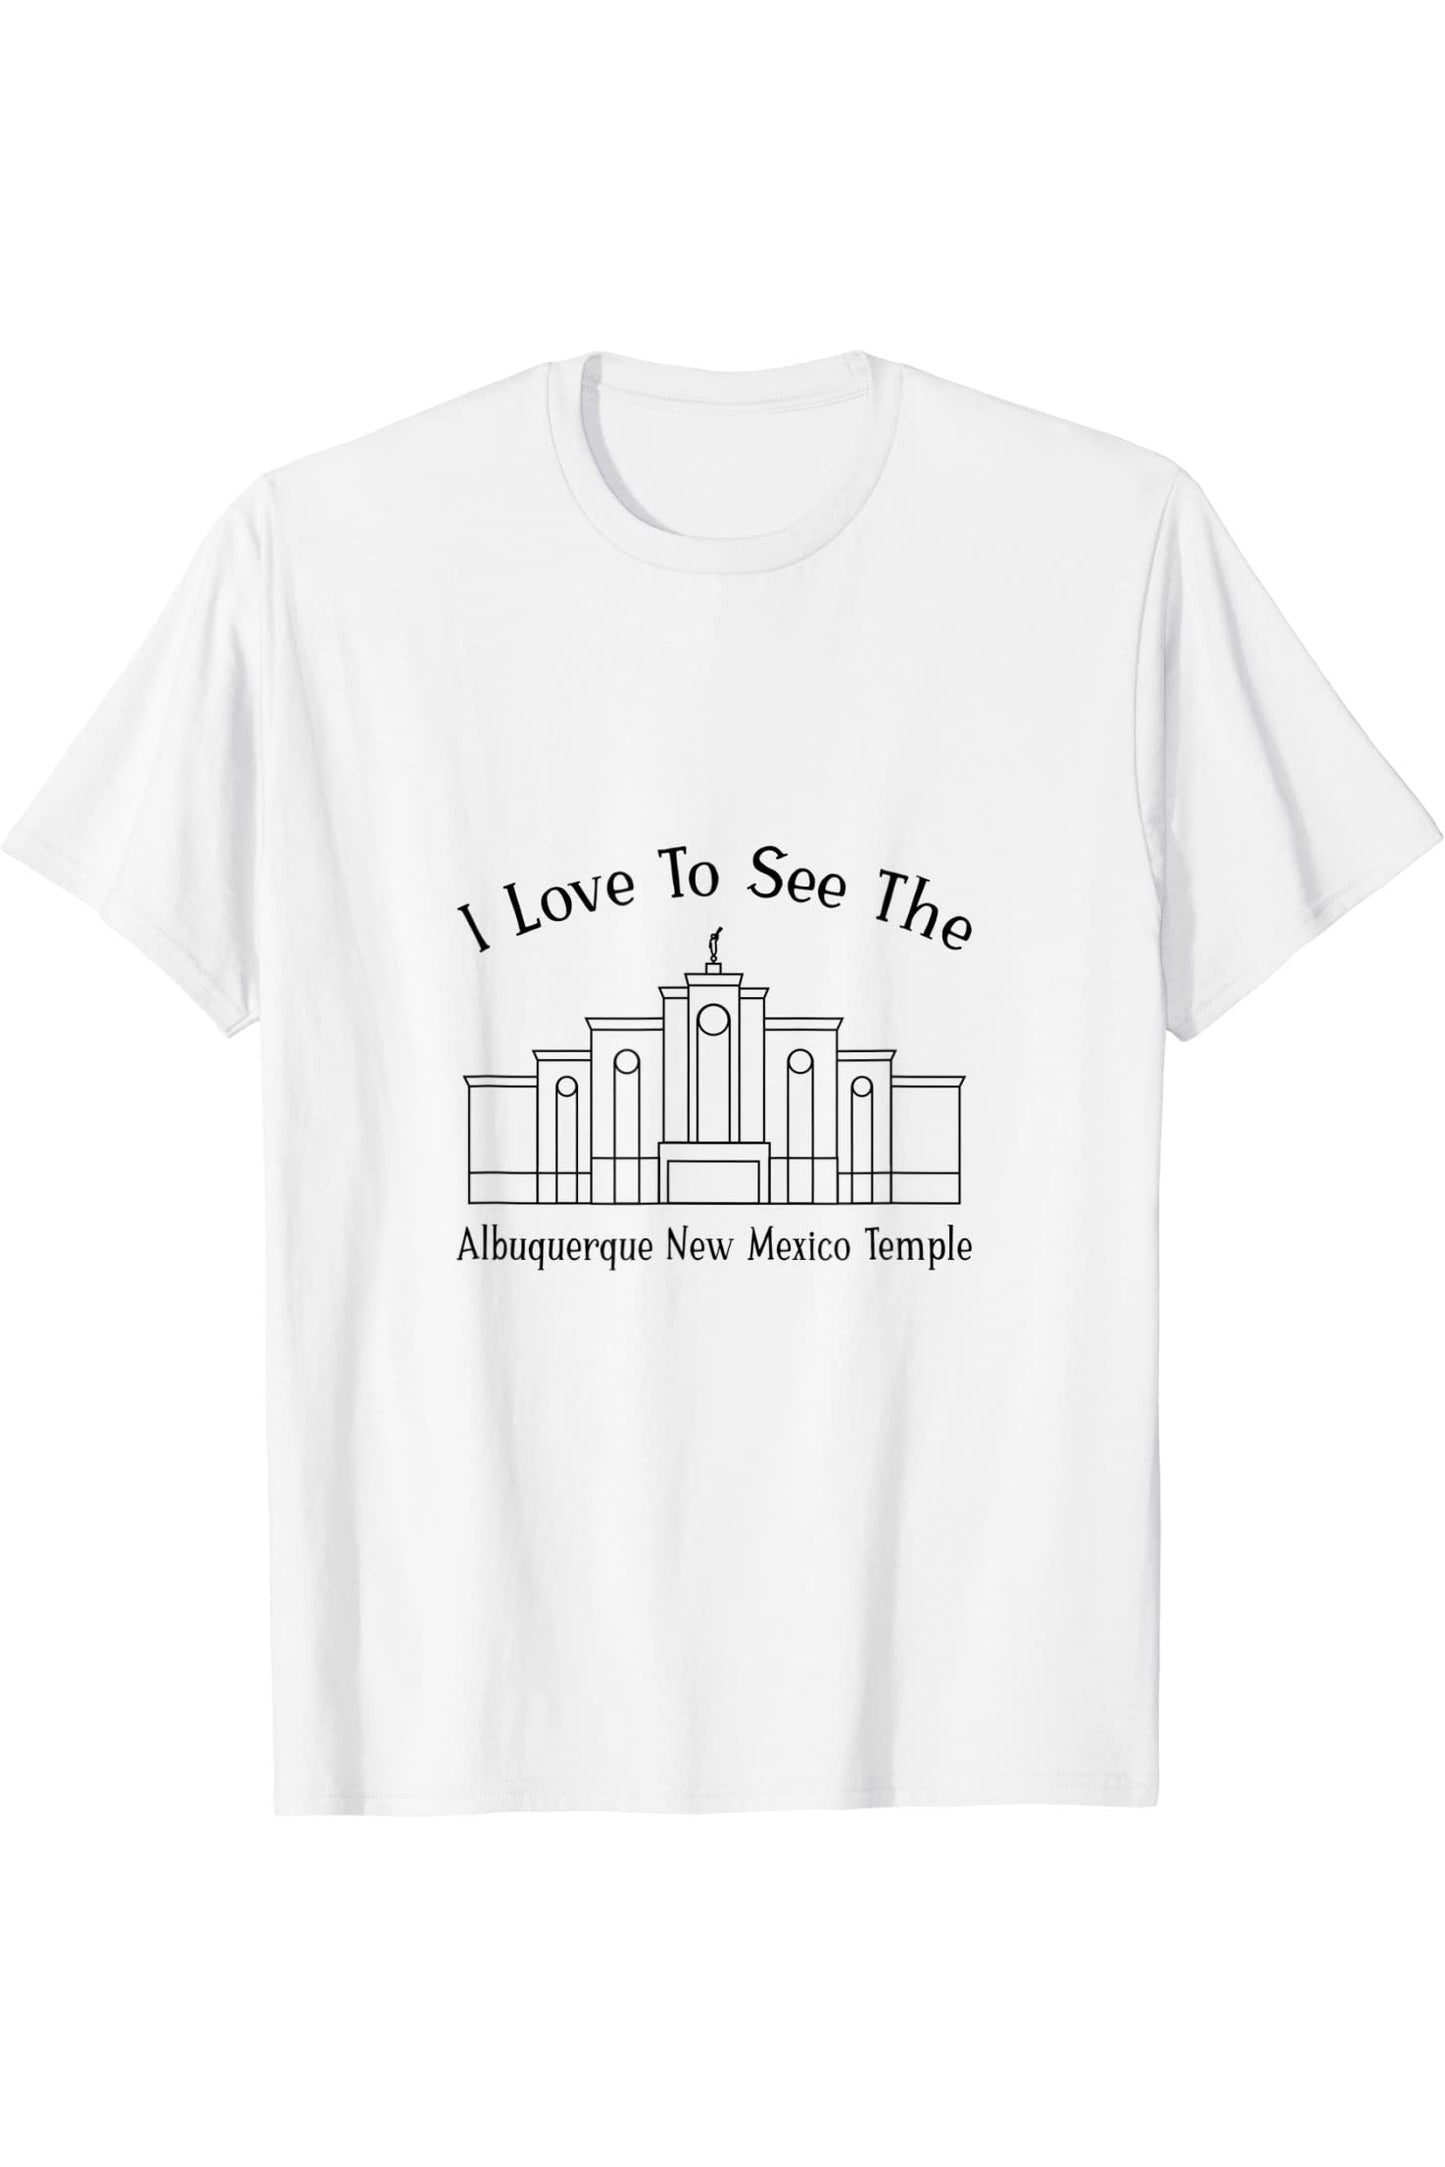 Albuquerque New Mexico Temple T-Shirt - Happy Style (English) US